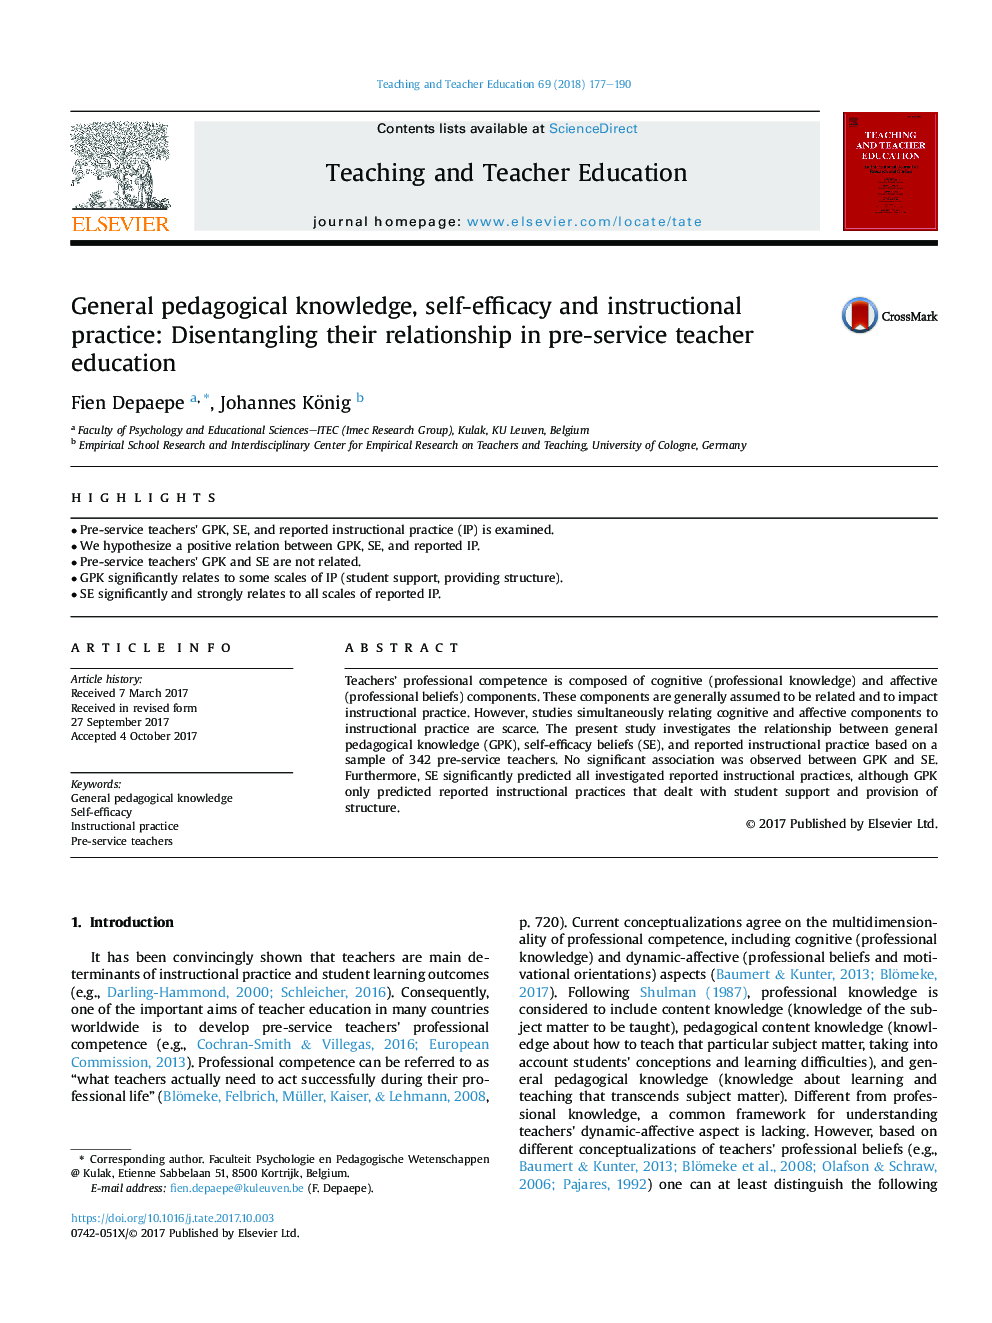 General pedagogical knowledge, self-efficacy and instructional practice: Disentangling their relationship in pre-service teacher education